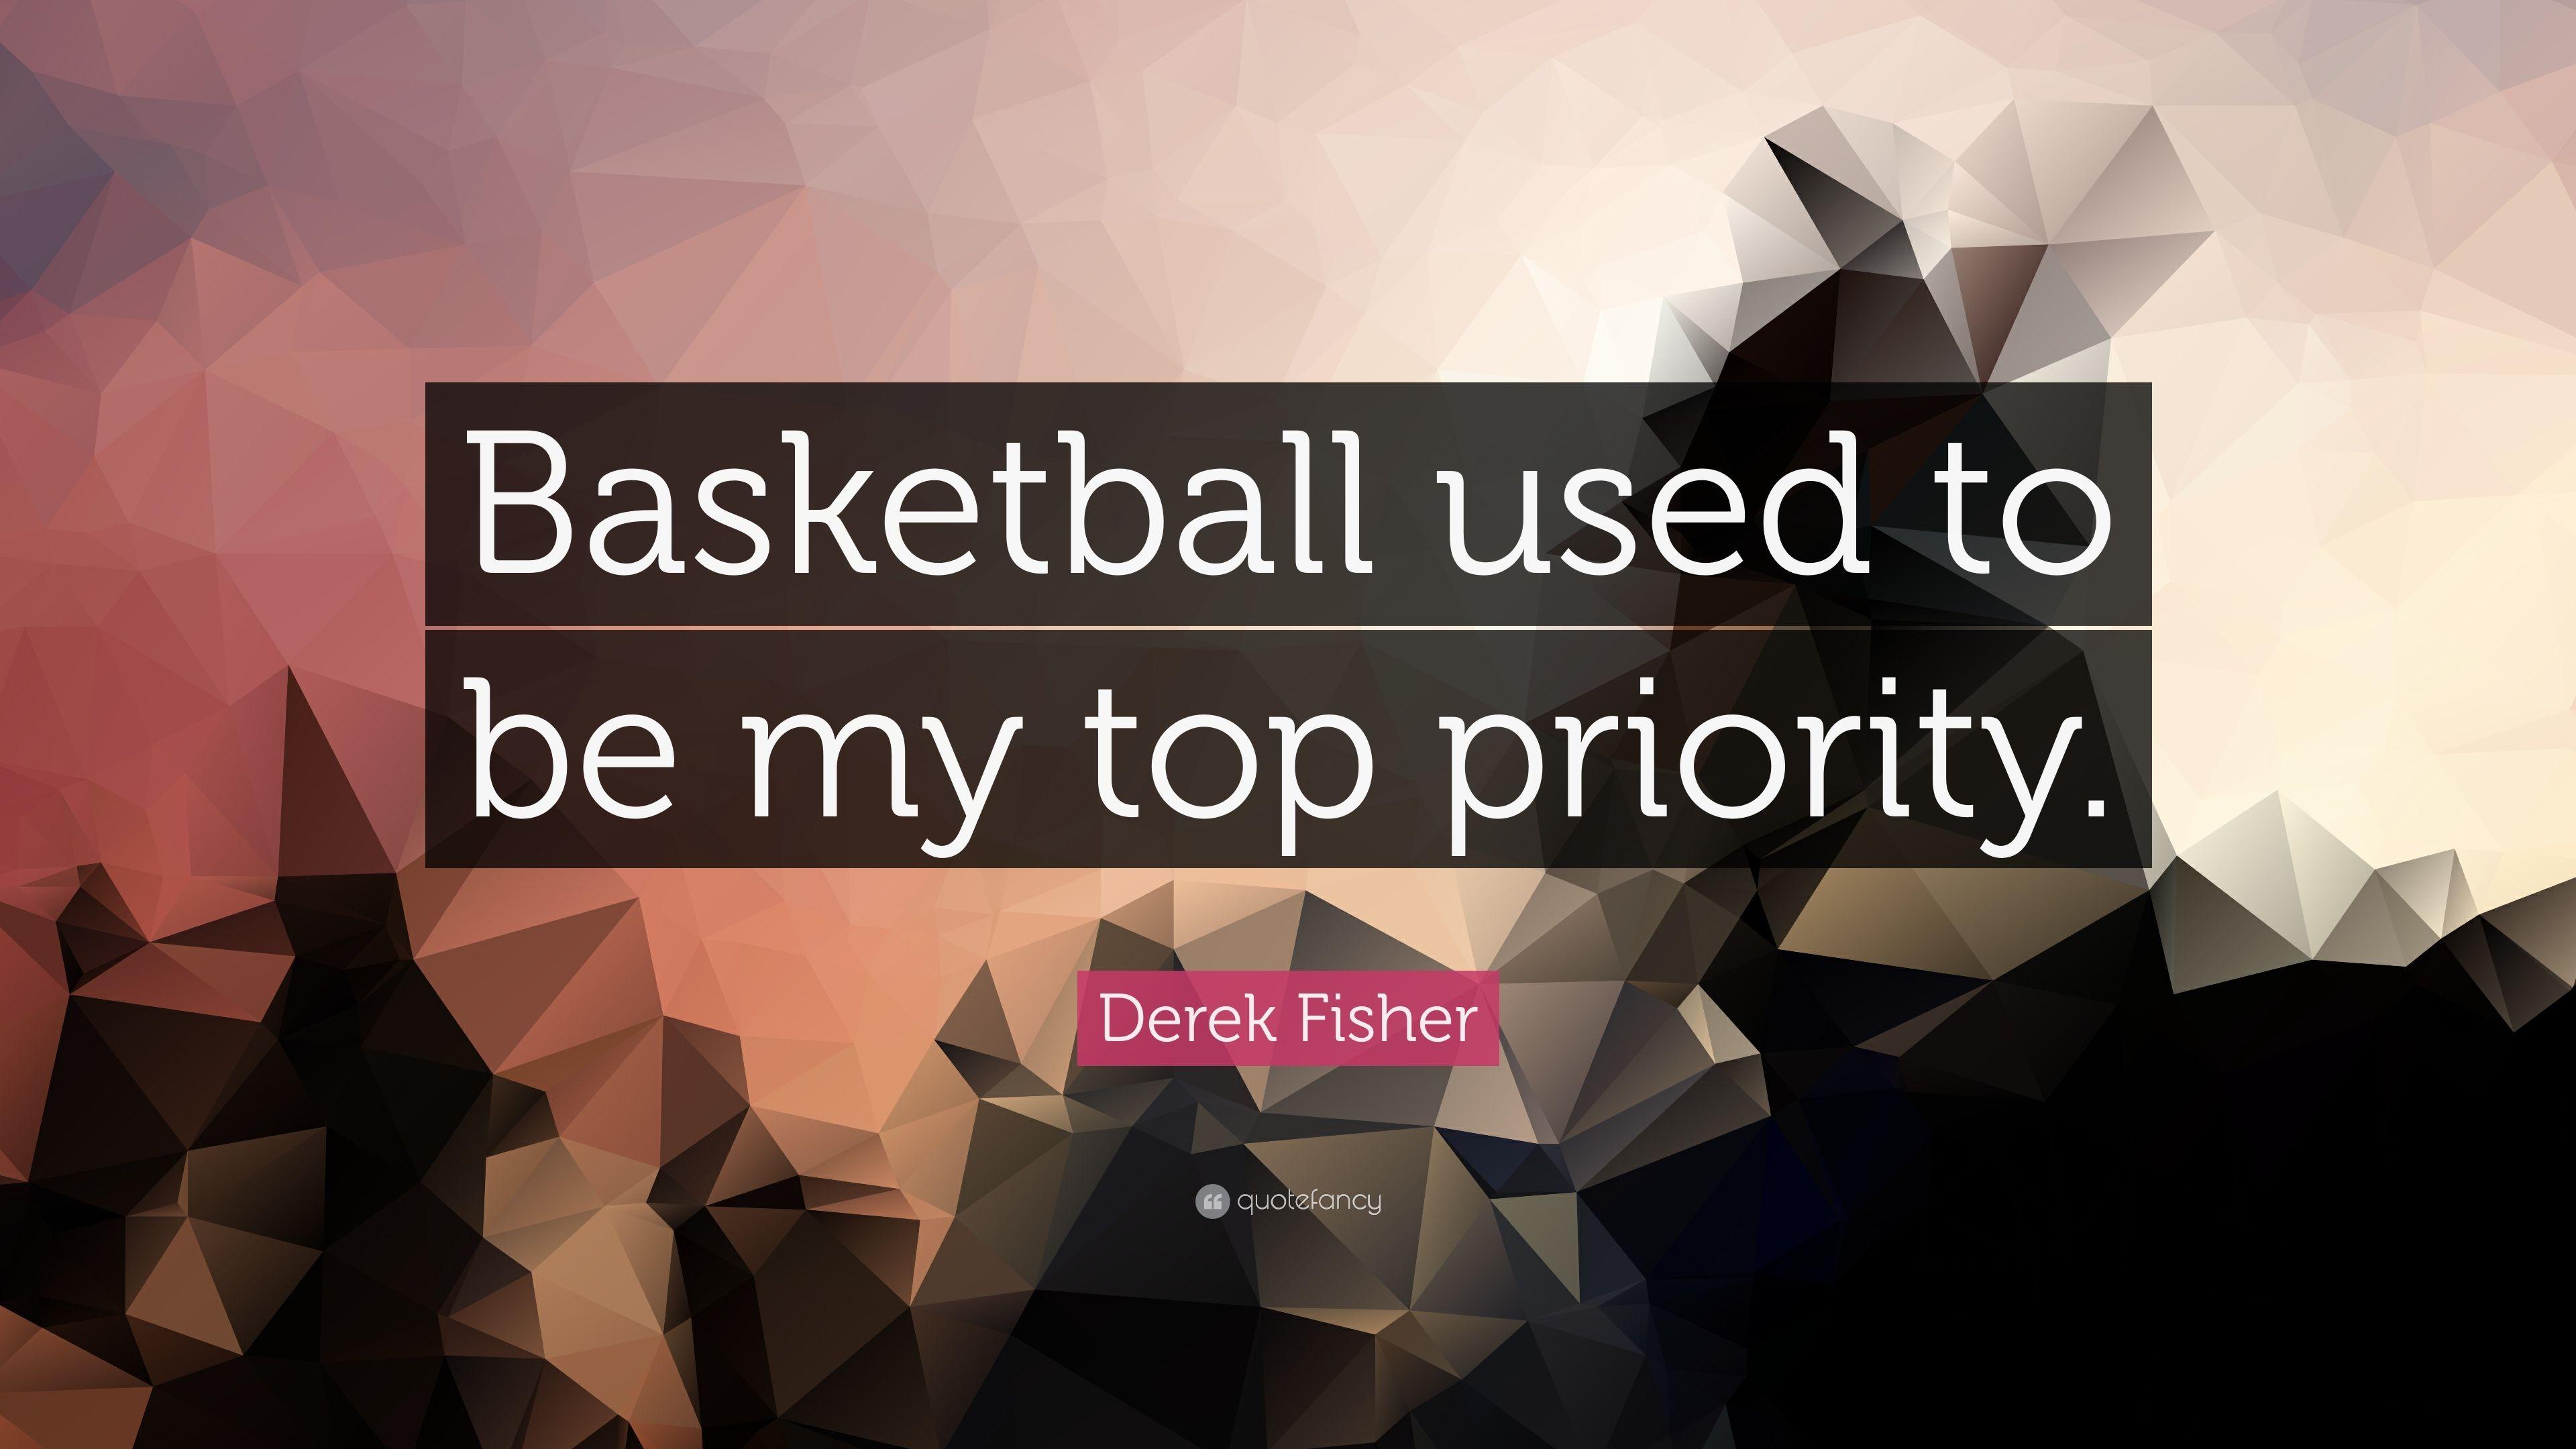 Derek Fisher Quote: “Basketball used to be my top priority.” 5